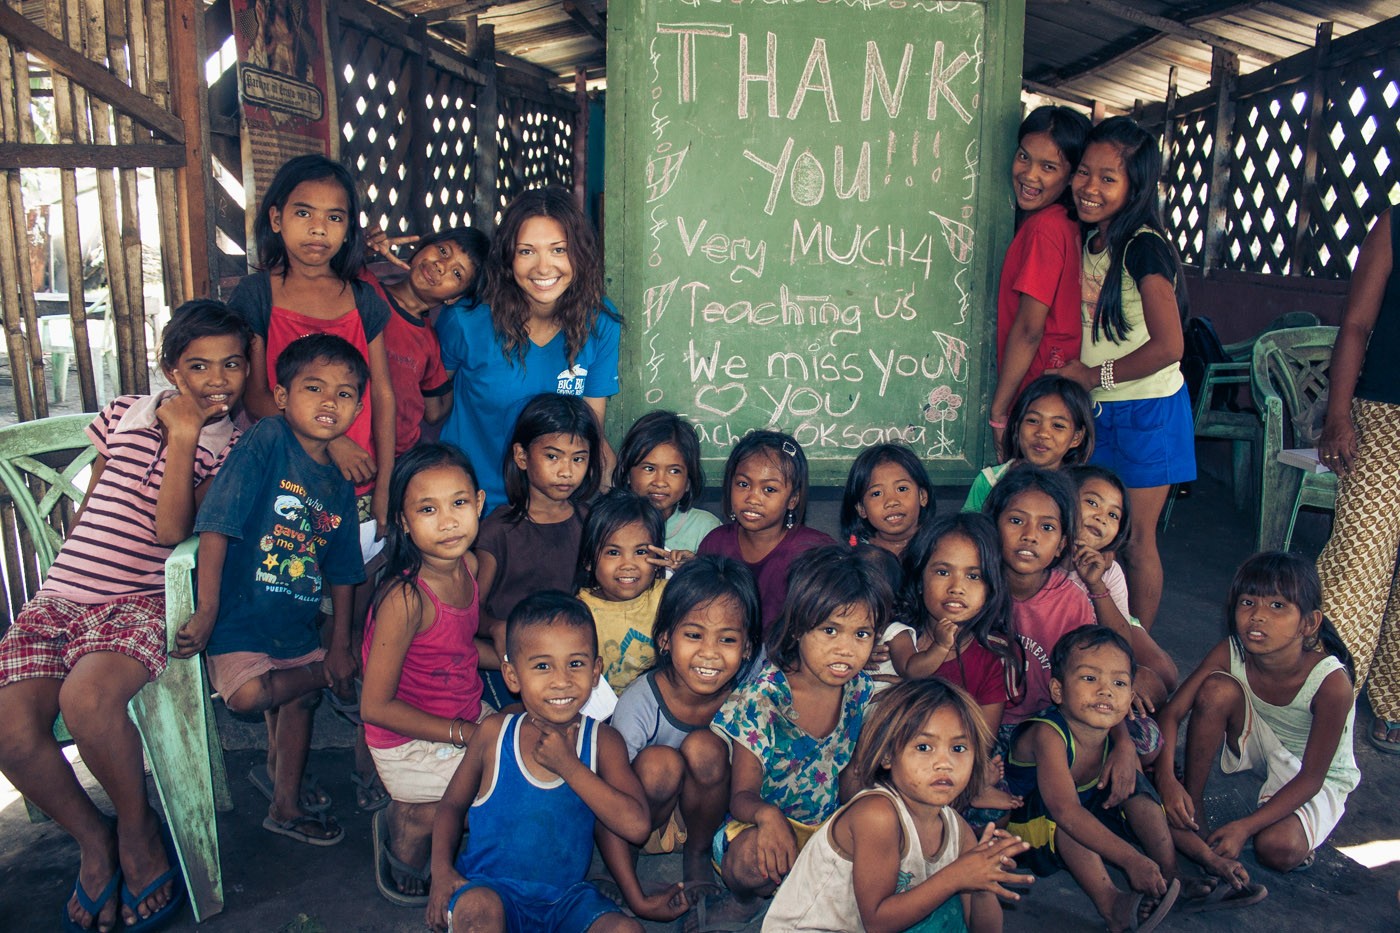 Off the Beaten Path in Philippines: Falling in Love With Teaching at a Dump Site near Cebu